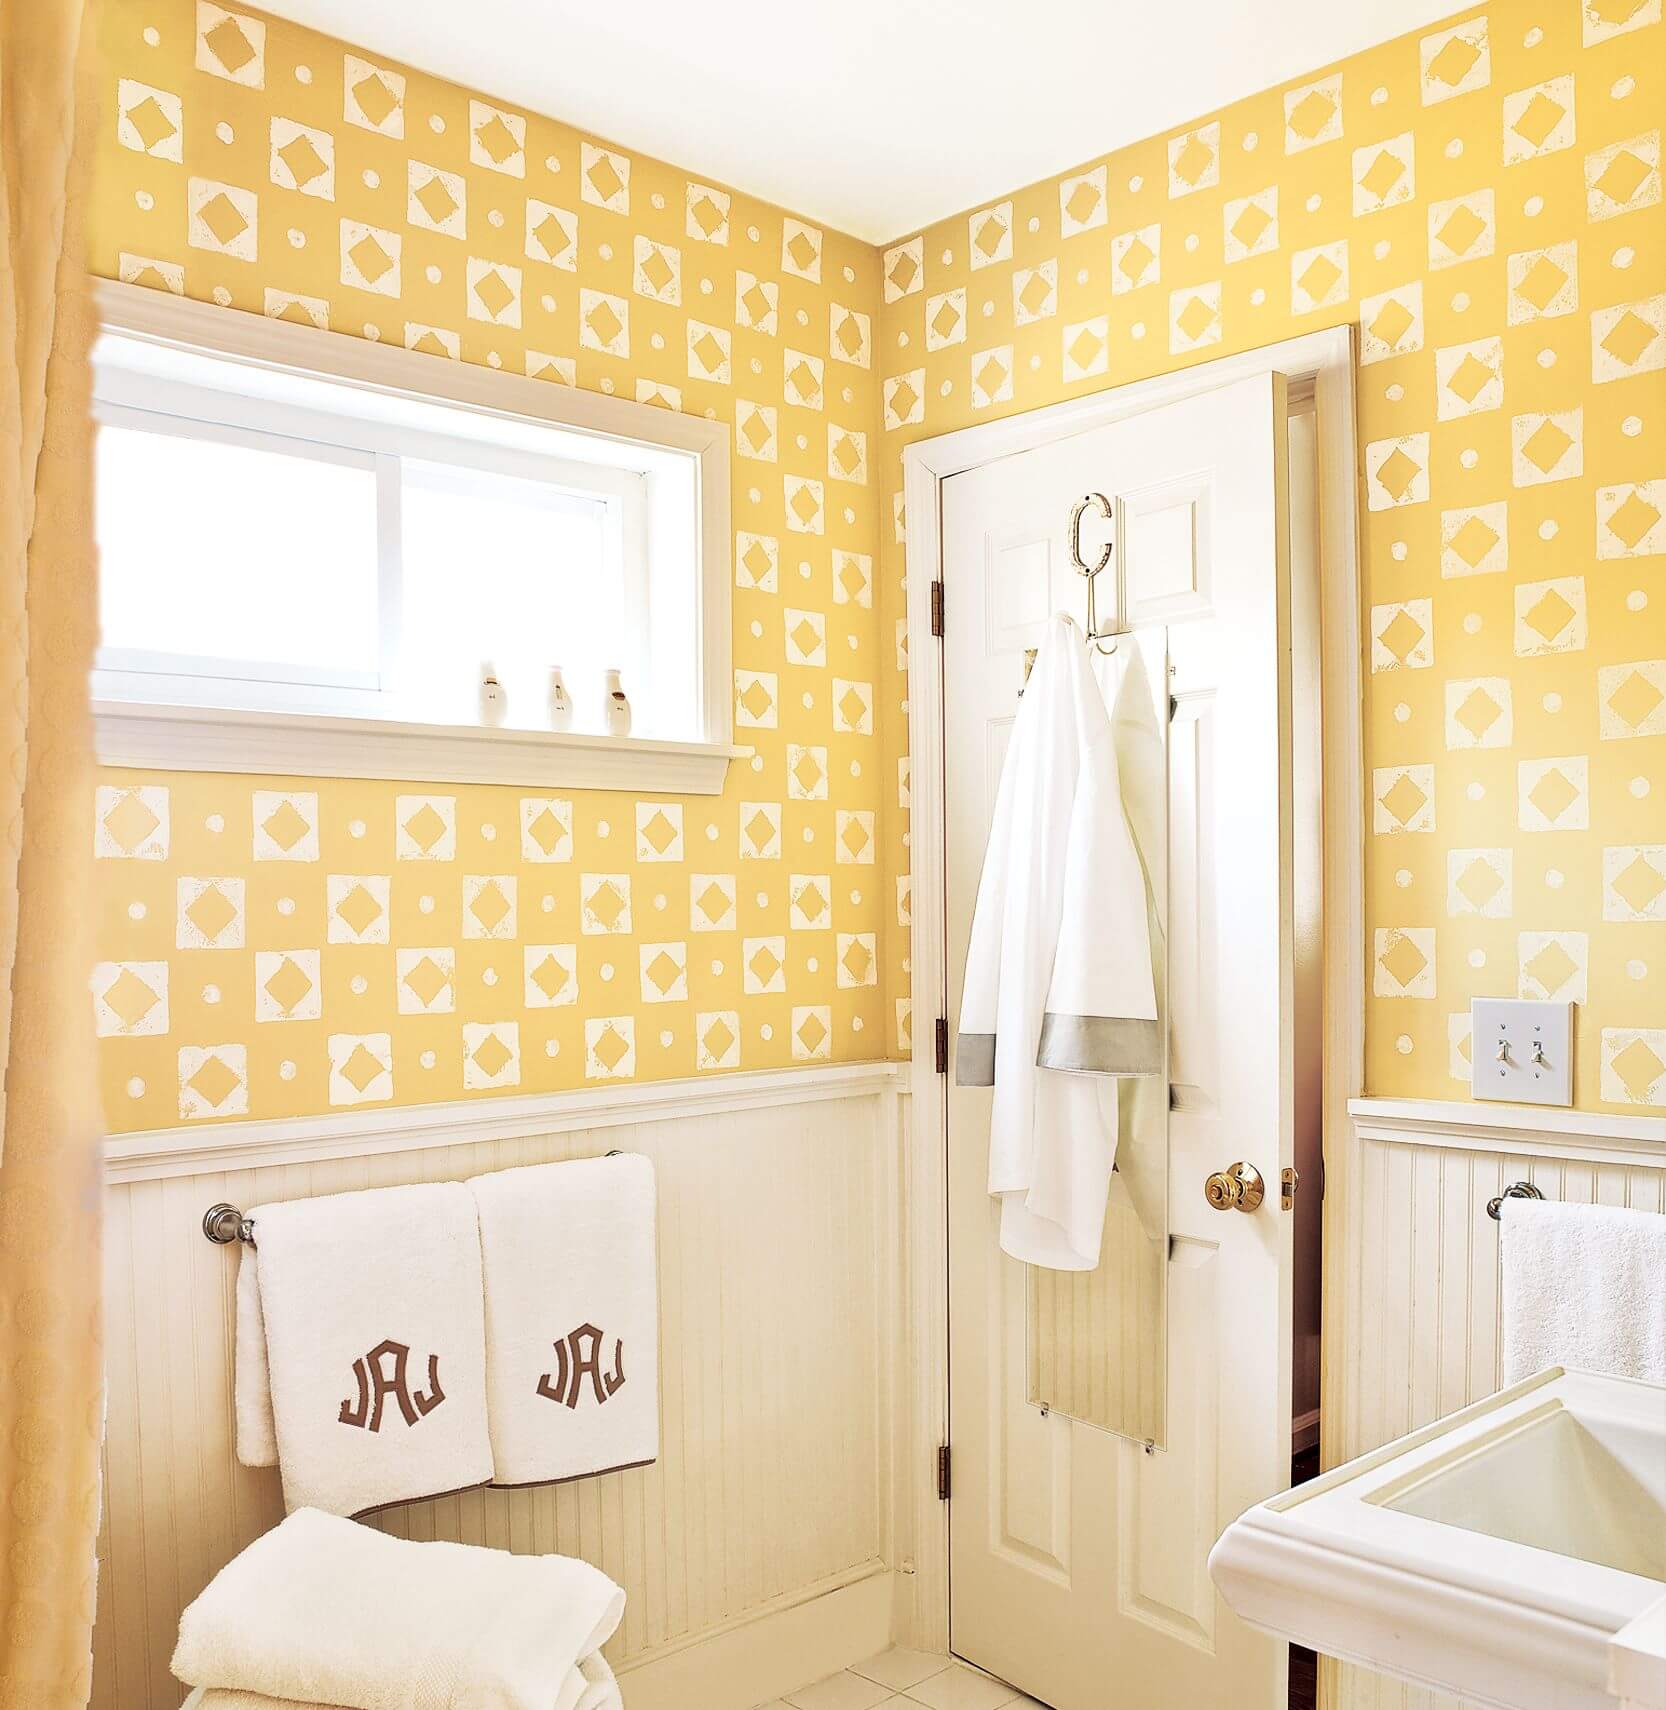 A bathroom with yellow and white wallpaper and towels
